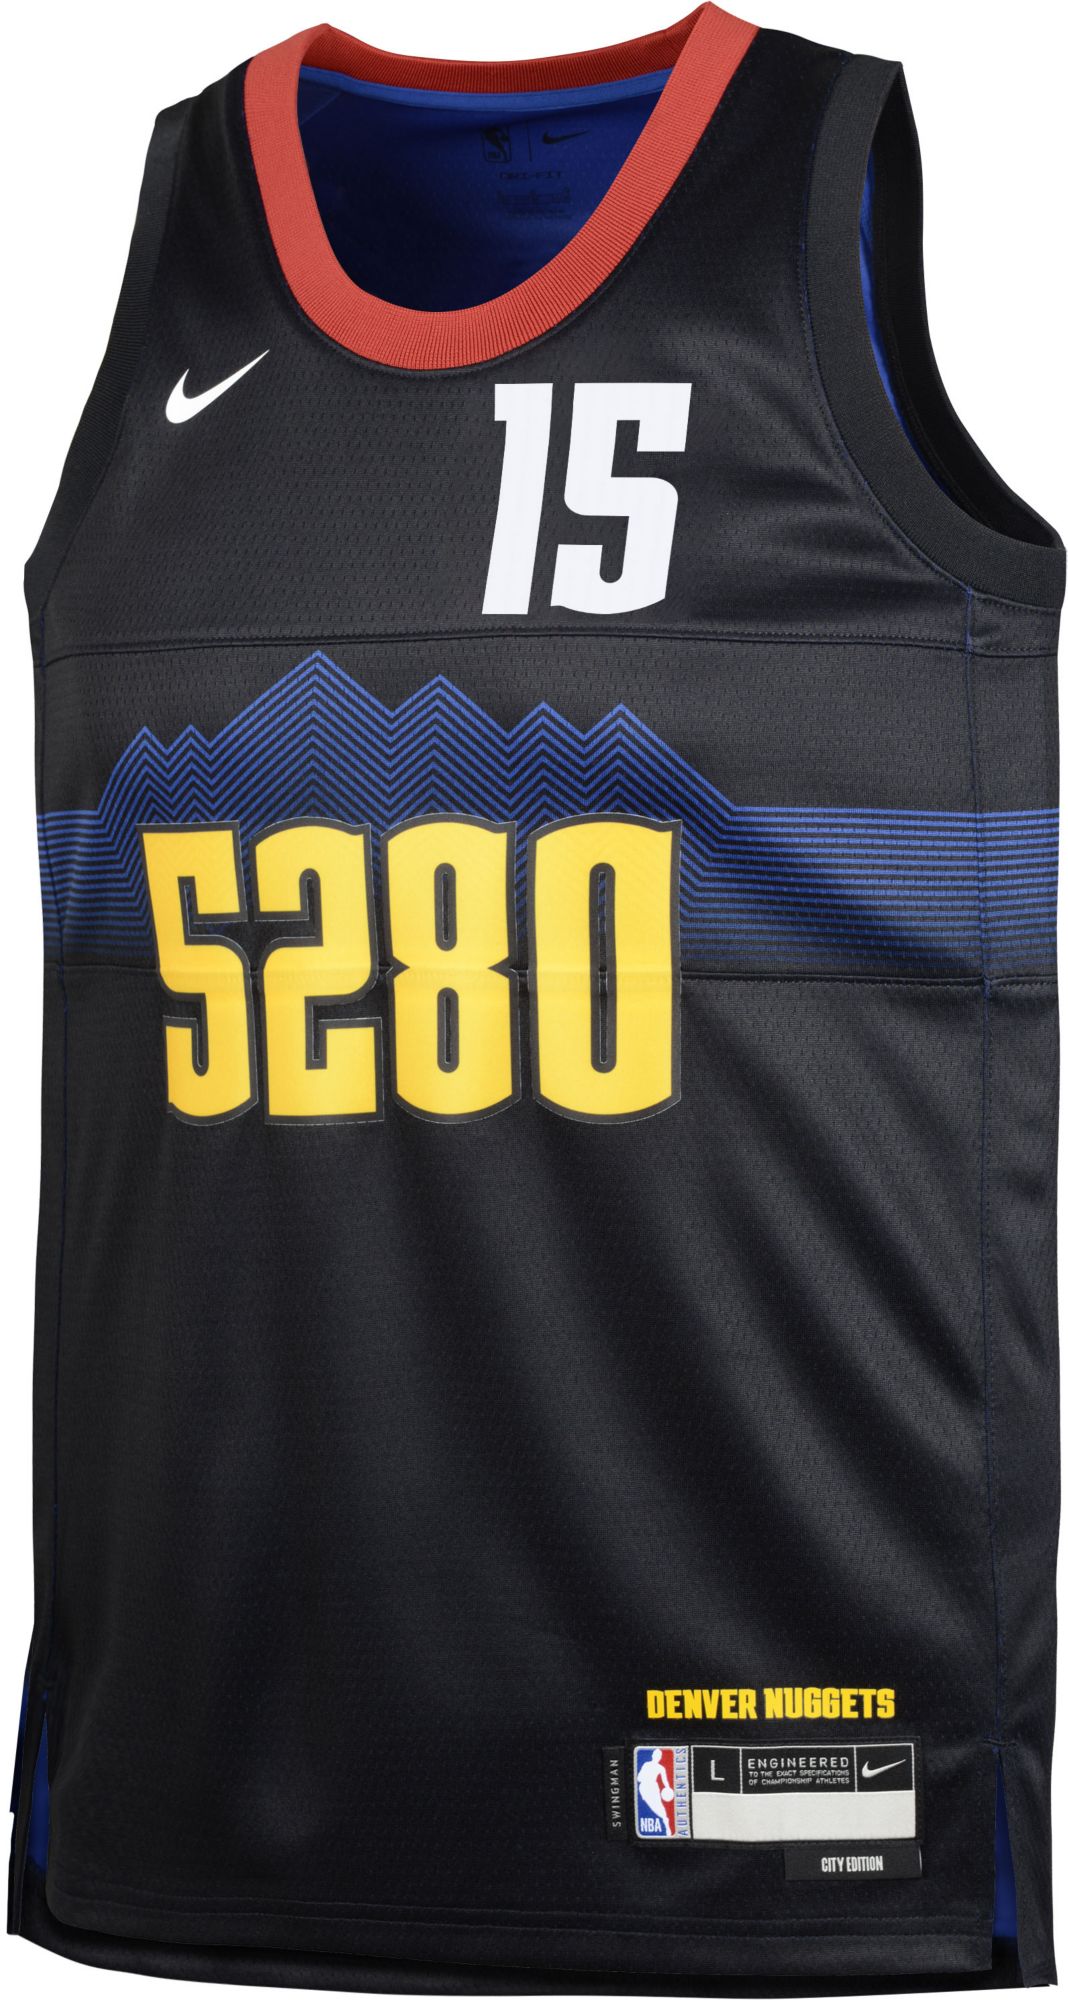 nuggets 15 jersey